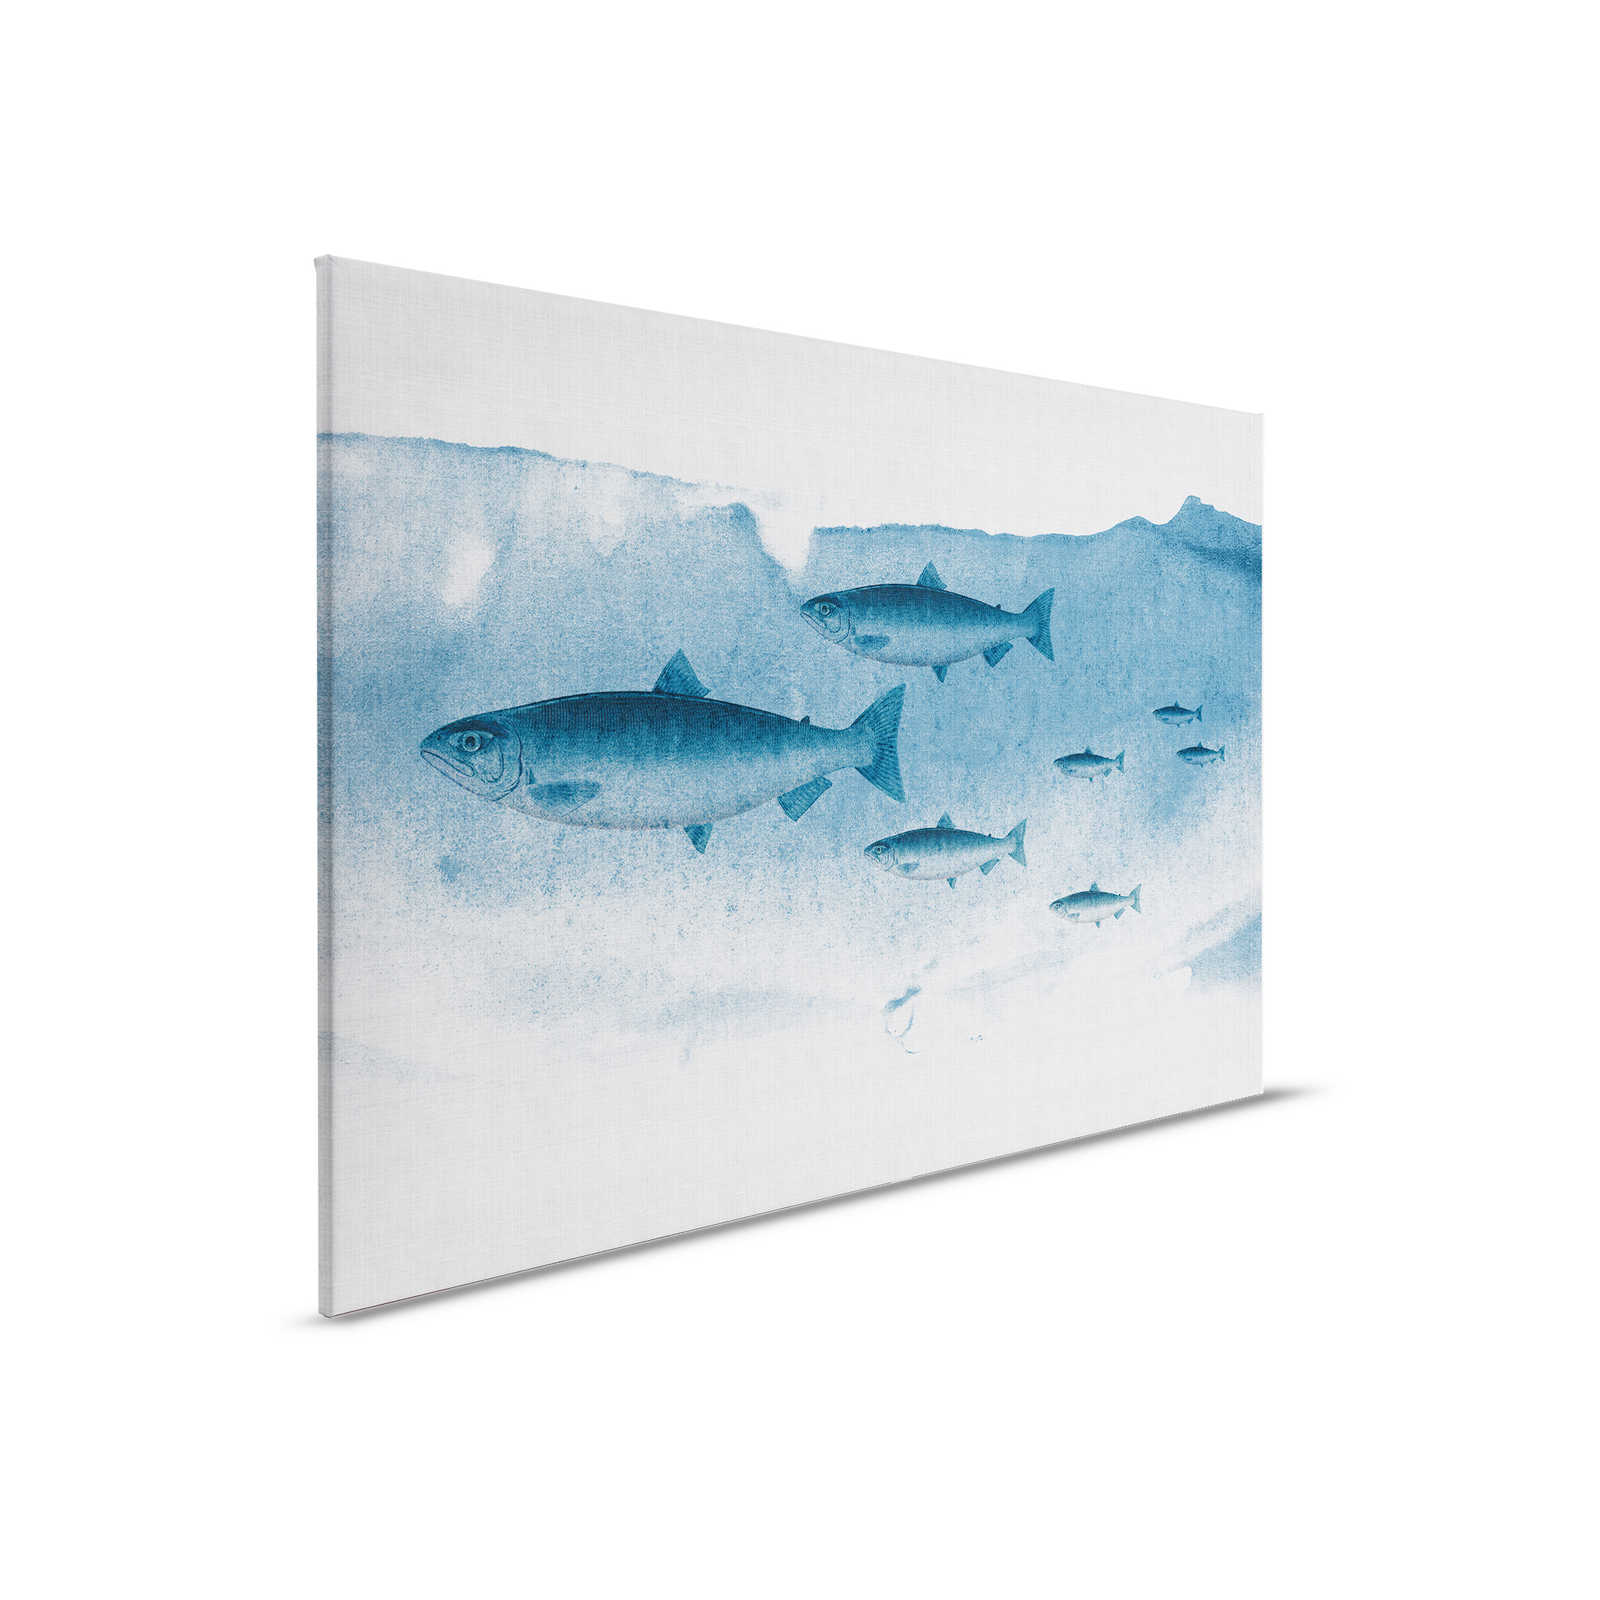 Into the blue 1 - Fish watercolour in blue as canvas picture in natural linen structure - 0.90 m x 0.60 m
